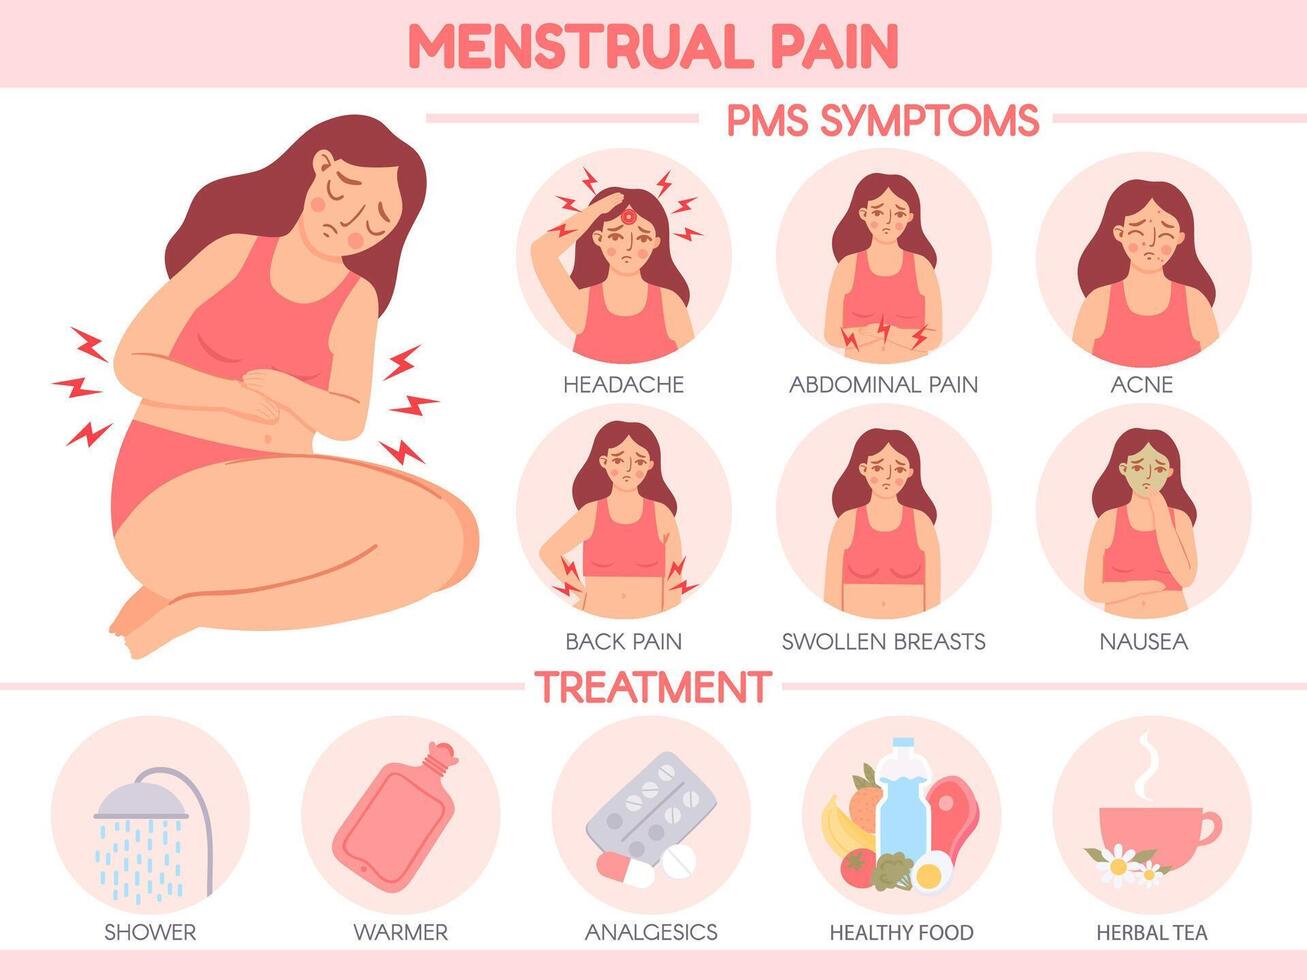 Menstrual pain. PMS symptoms and premenstrual syndrome treatment. Women abdominal pains and headache. Menstruation cycle vector infographic